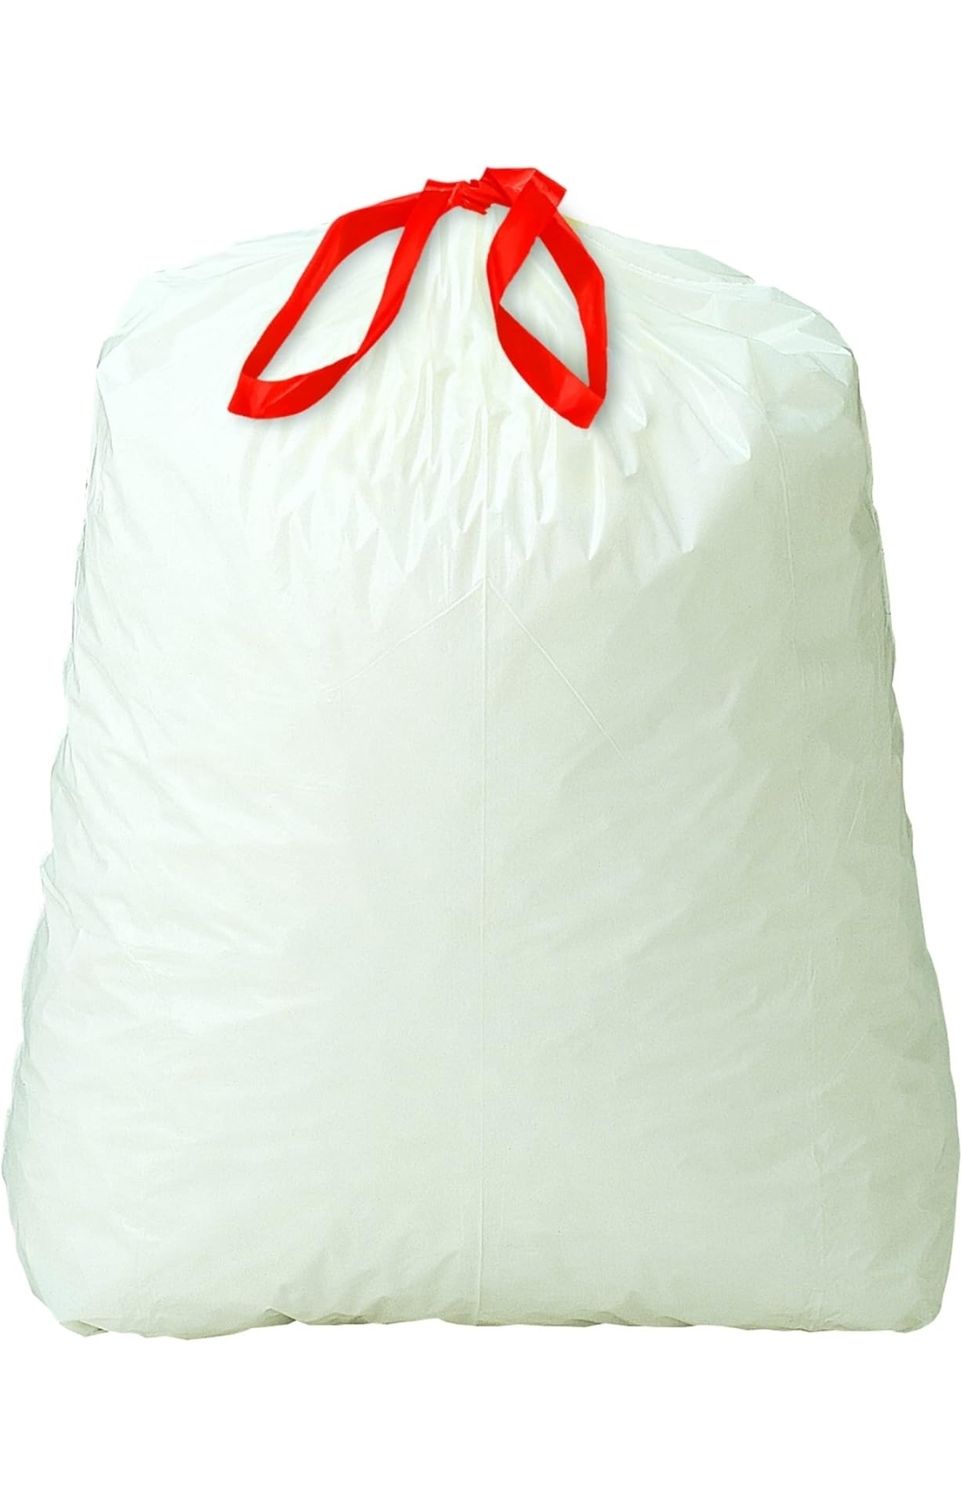 White trash bag with red drawstring closure for easy tying and carrying